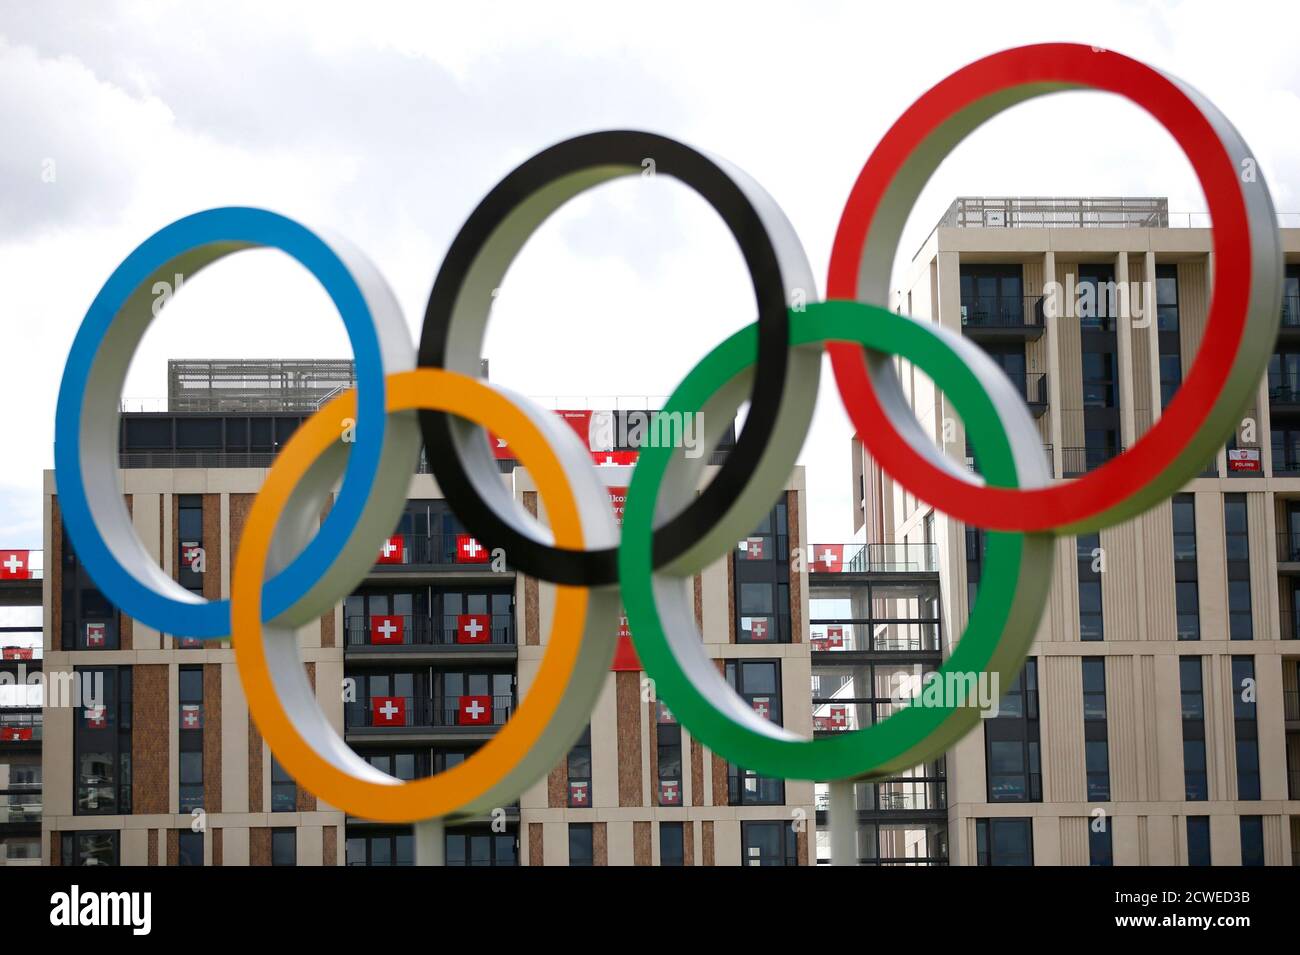 Swiss flags are visible through the Olympic rings the Athletes' Village at the Olympic Park in London, July 19, 2012.  REUTERS/Jae C. Hong/Pool (BRITAIN - Tags: SPORT OLYMPICS) Stock Photo